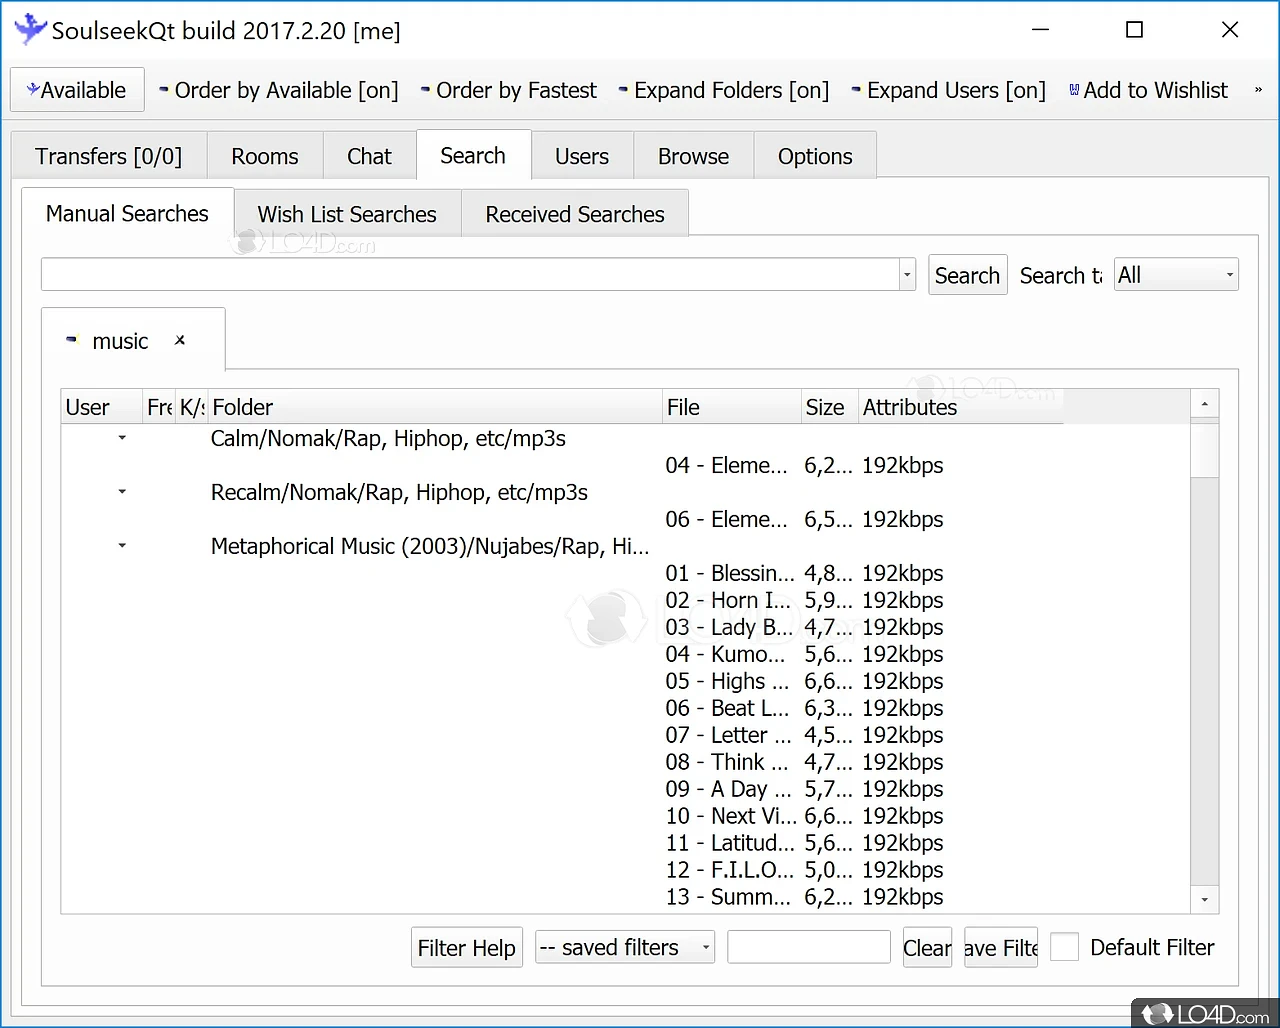 Soulseek Build 2019.7.22 Free Download for Windows 10, 8 and 7